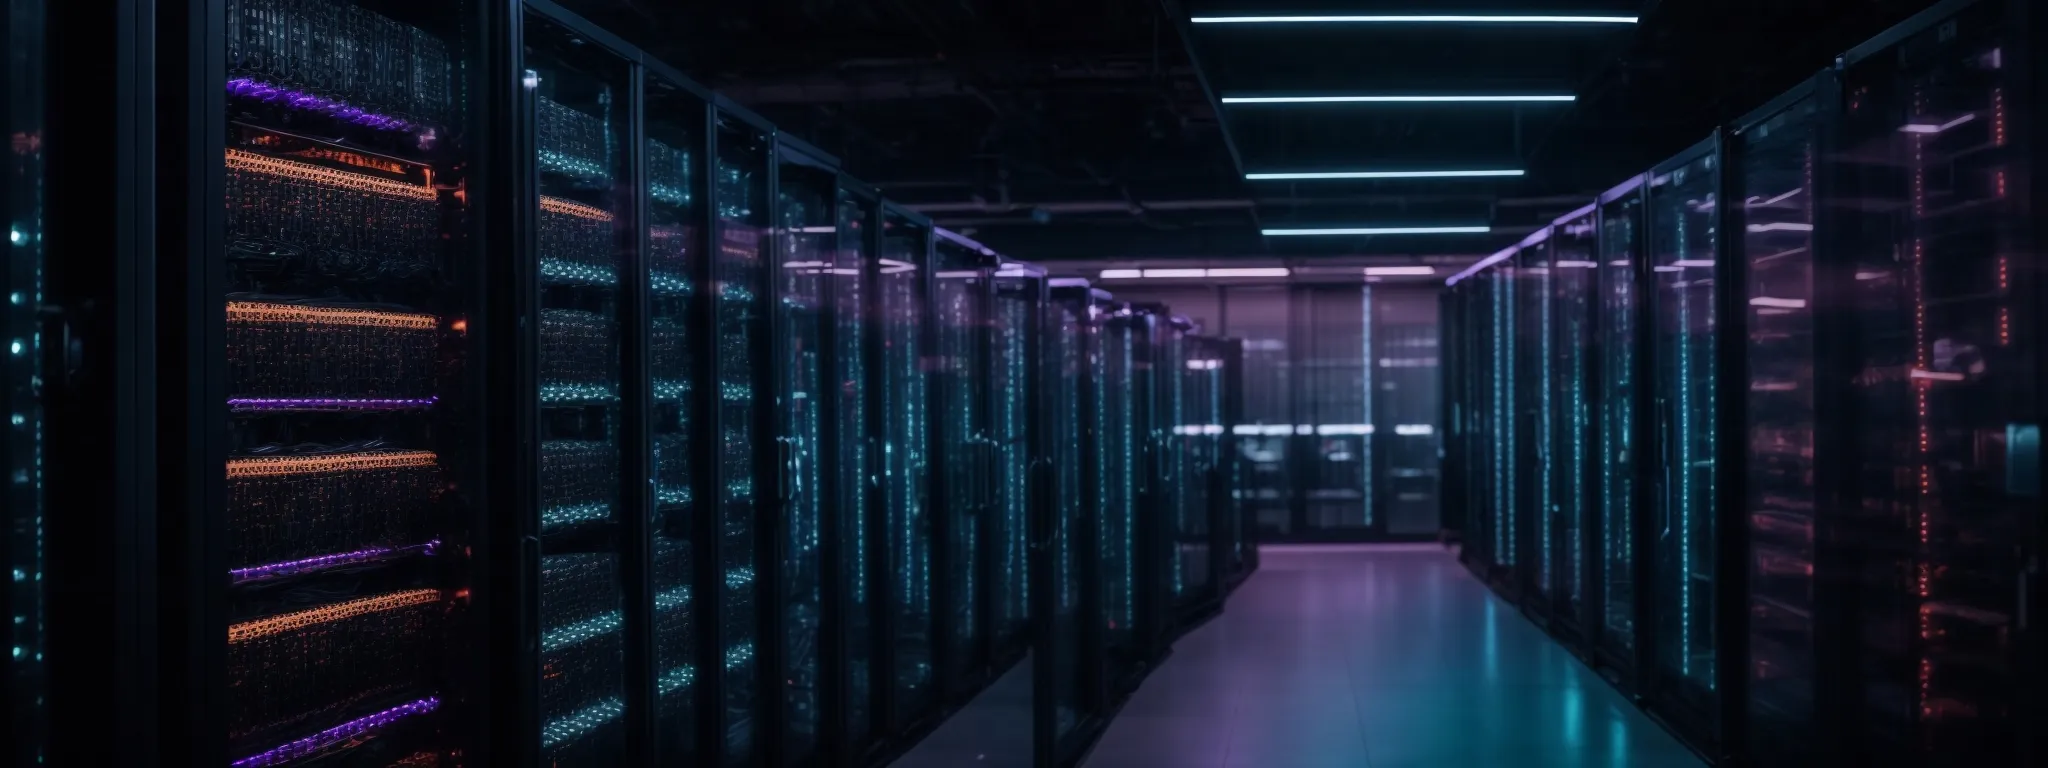 a panoramic view of server racks in a data center with glowing lights indicating active network traffic.